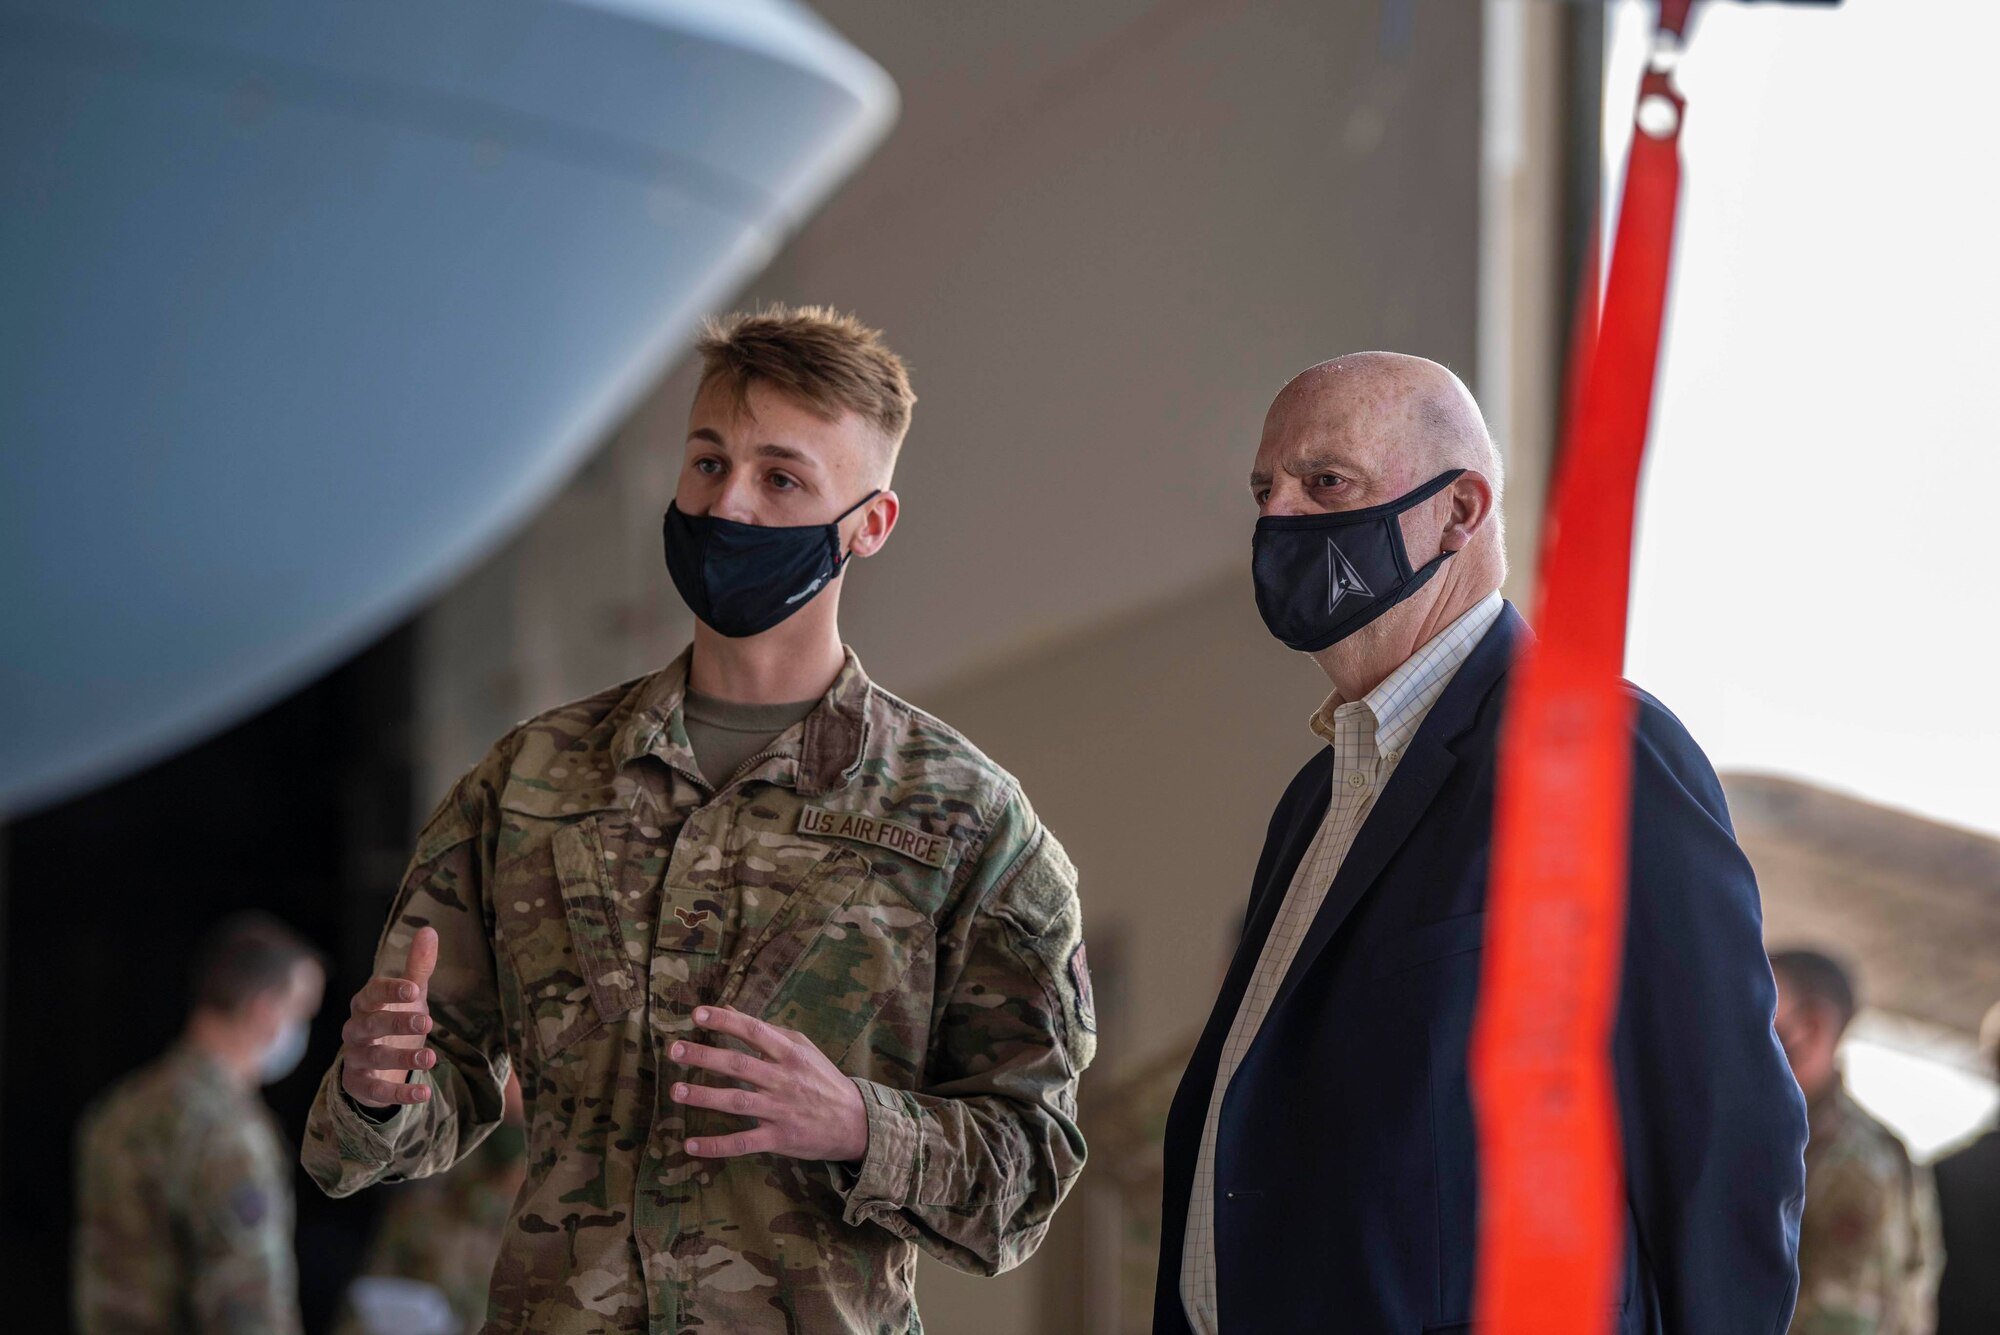 Secretary of the Air Force Roth is briefed by an Airman.